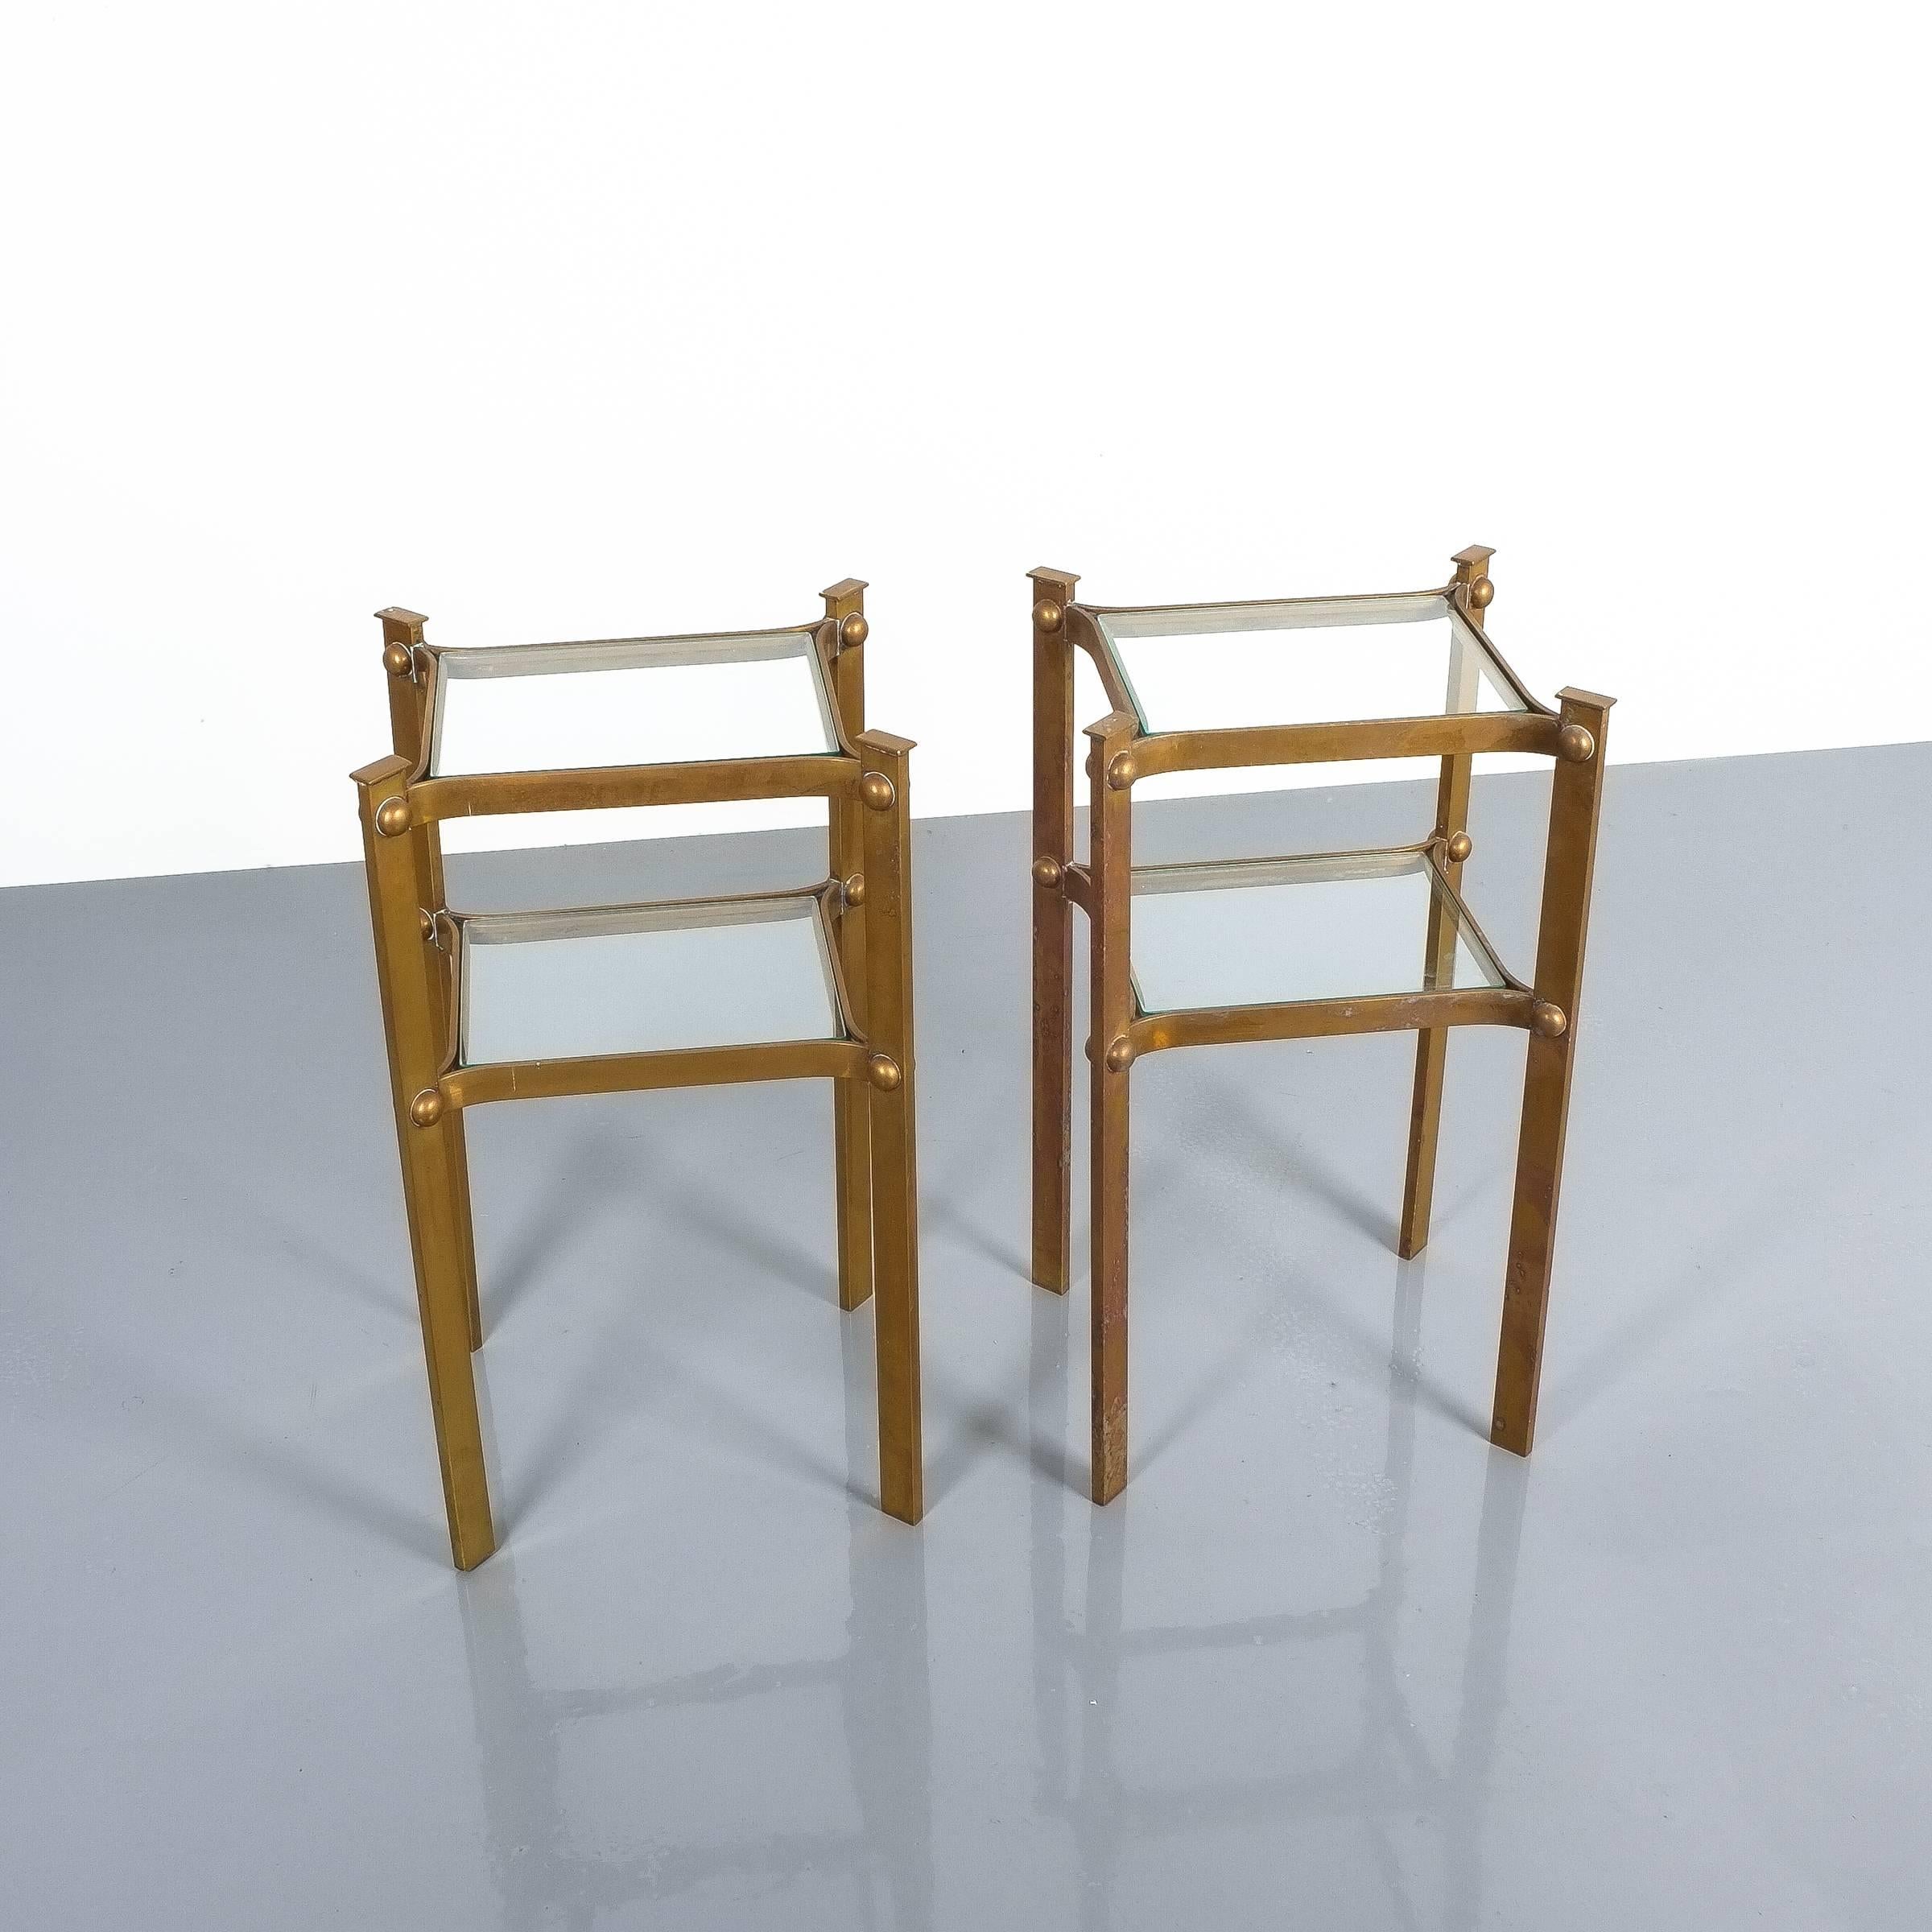 Mid-20th Century Cute Brass Side Tables with Glass Tops, France, 1940